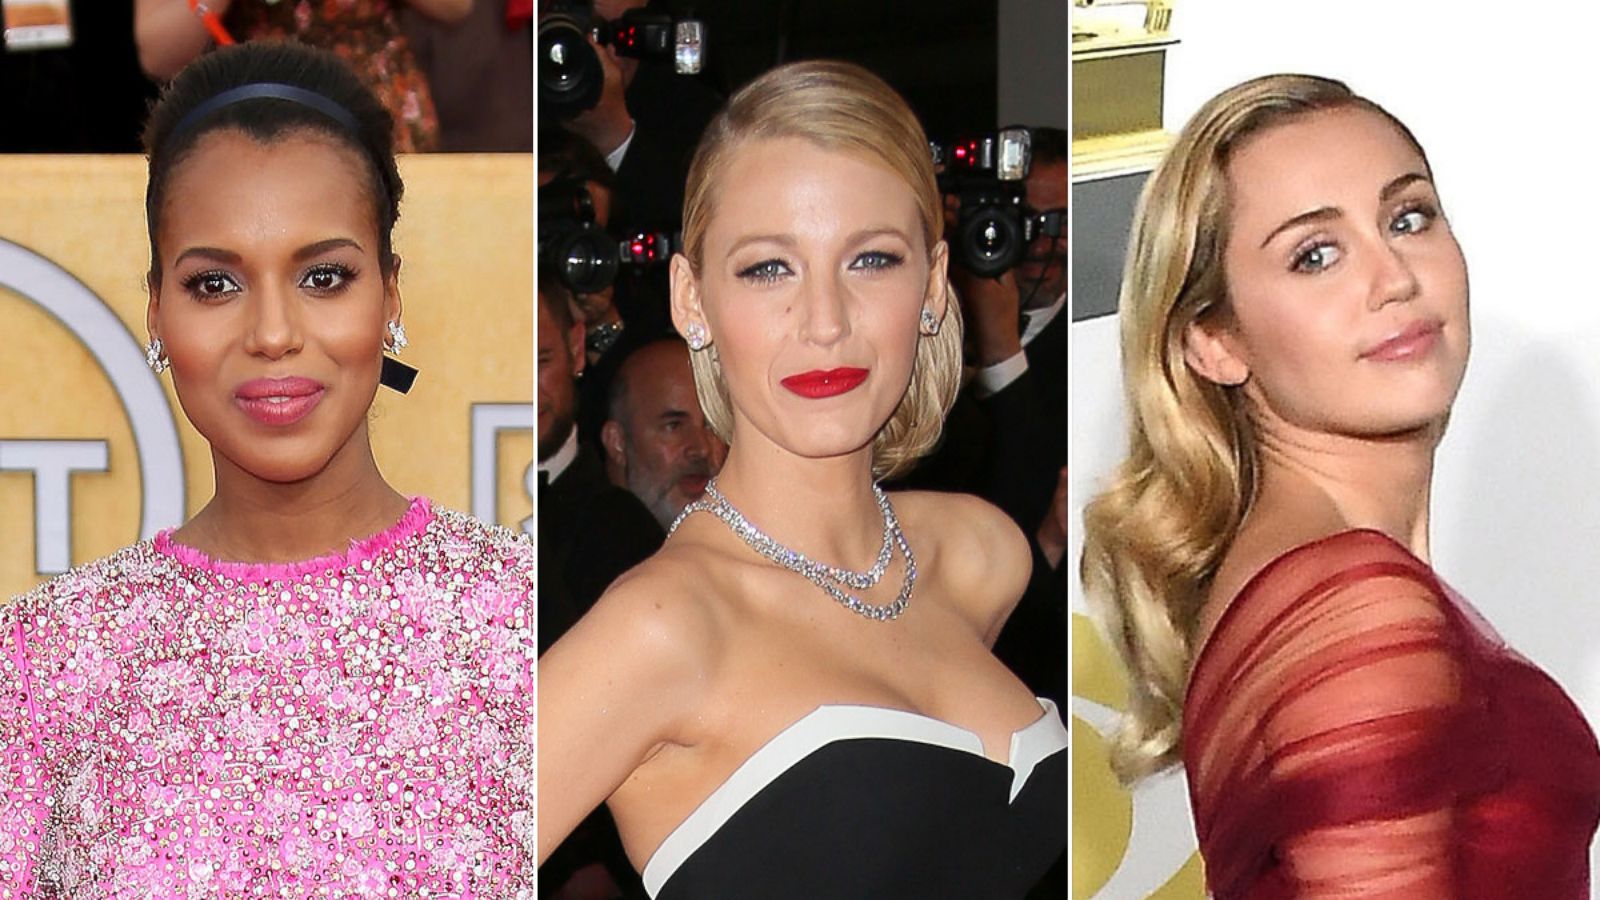 PHOTO: Kerry Washington at the 2014 SAG awards, Blake Lively at the 2014 Oscars, and Miley Cyrus at the 2018 Grammy Awards in New York.